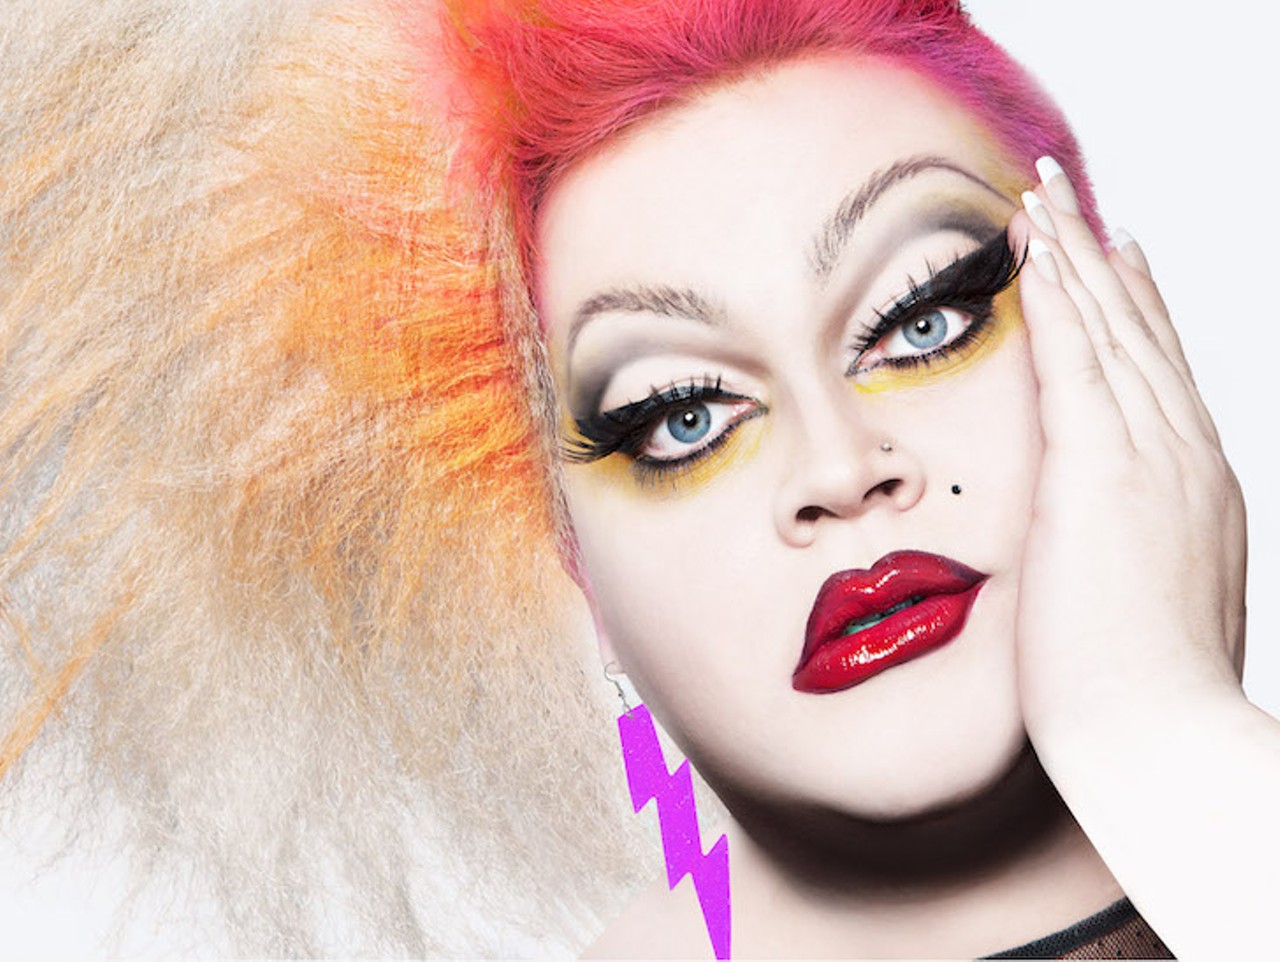 Sunday, Nov. 1Ginger Minj's Super Spectacular Low Budget Christmas Extravaganza at Parliament House